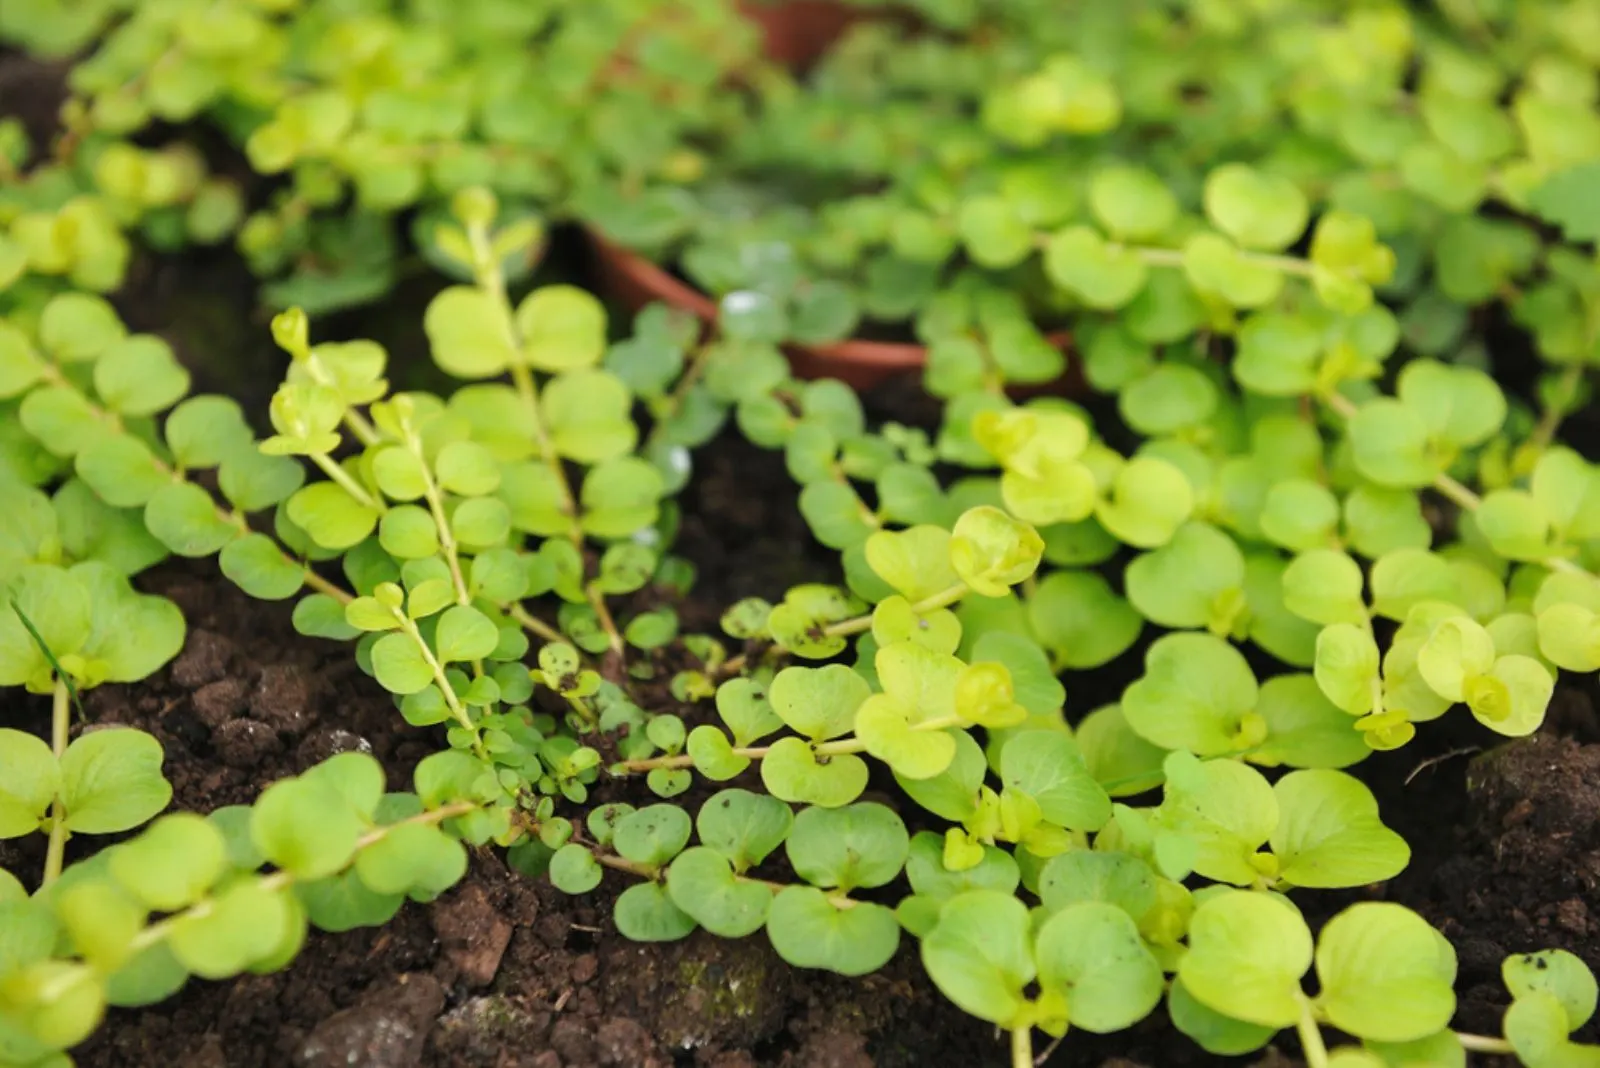 Creeping jenny planted in the garden